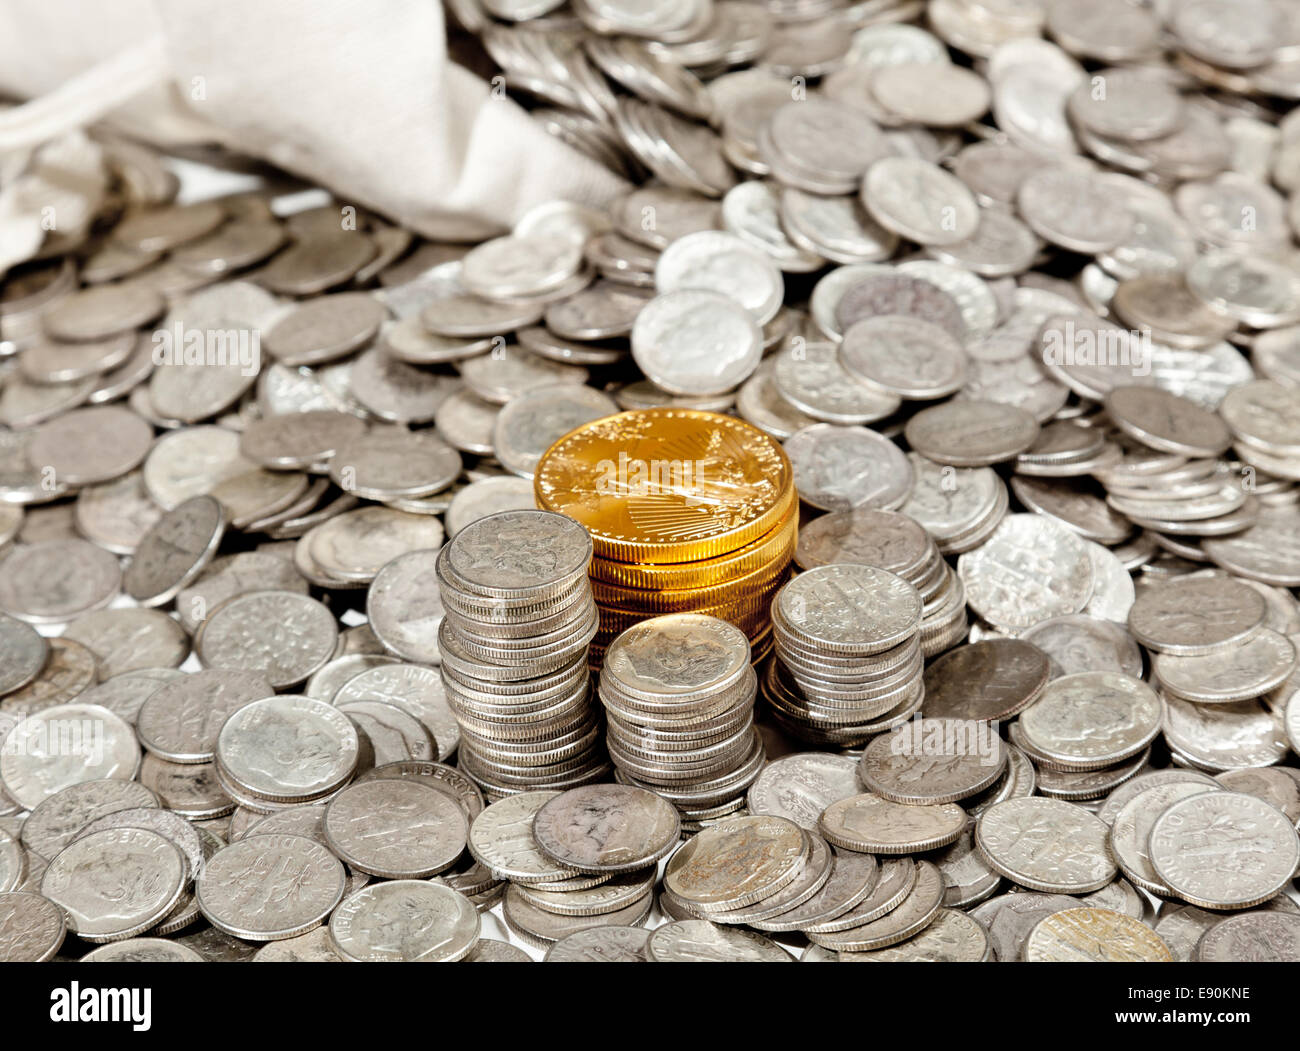 Bag of silver and gold coins Stock Photo